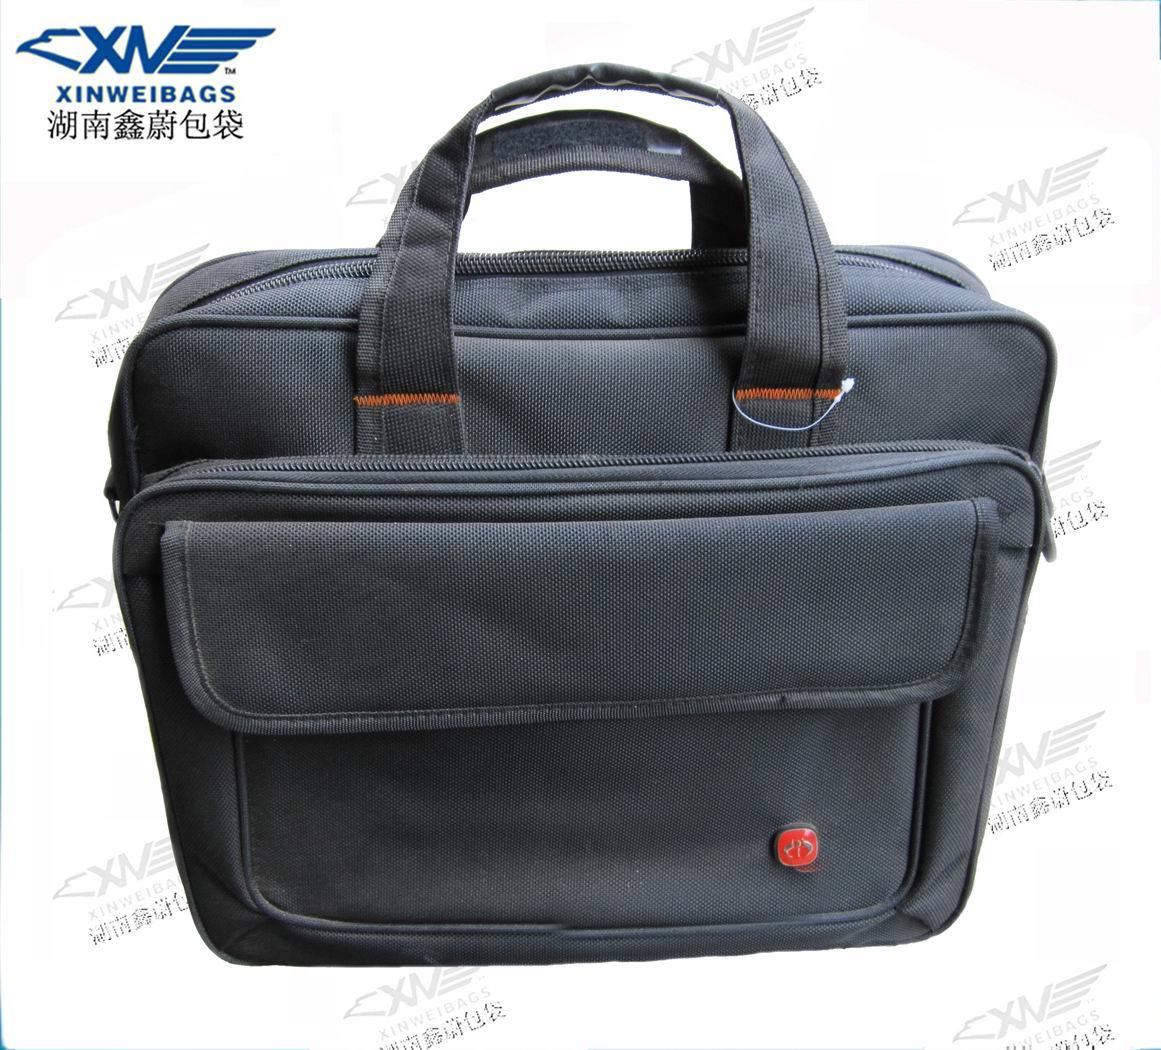 Business Laptop Bag with Classic Design (0188#)